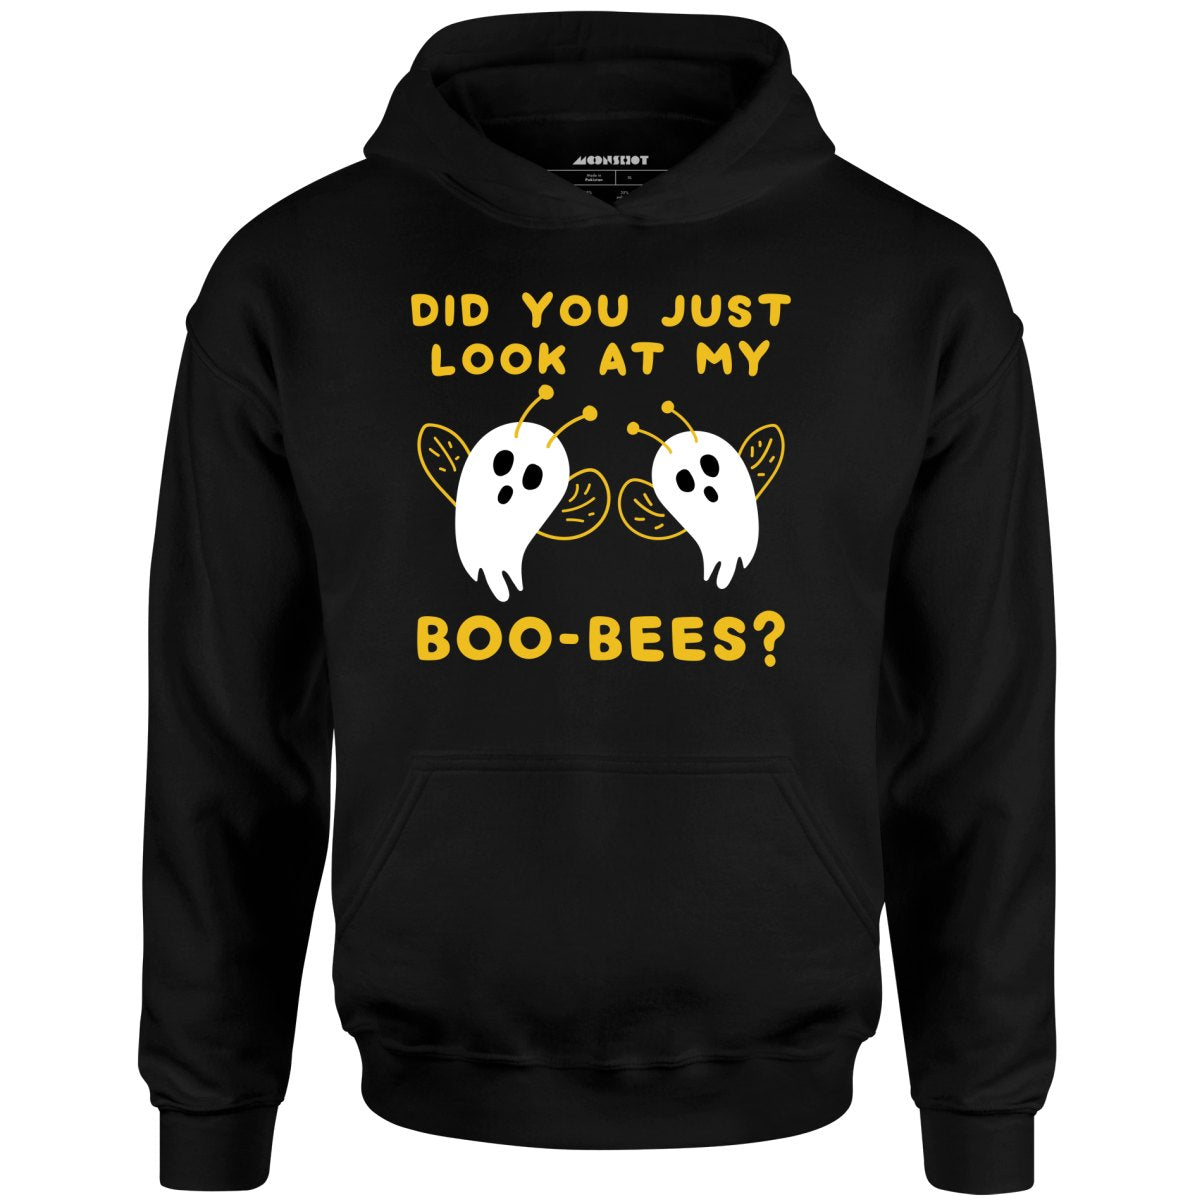 Did You Just Look At My Boo-Bees? - Unisex Hoodie